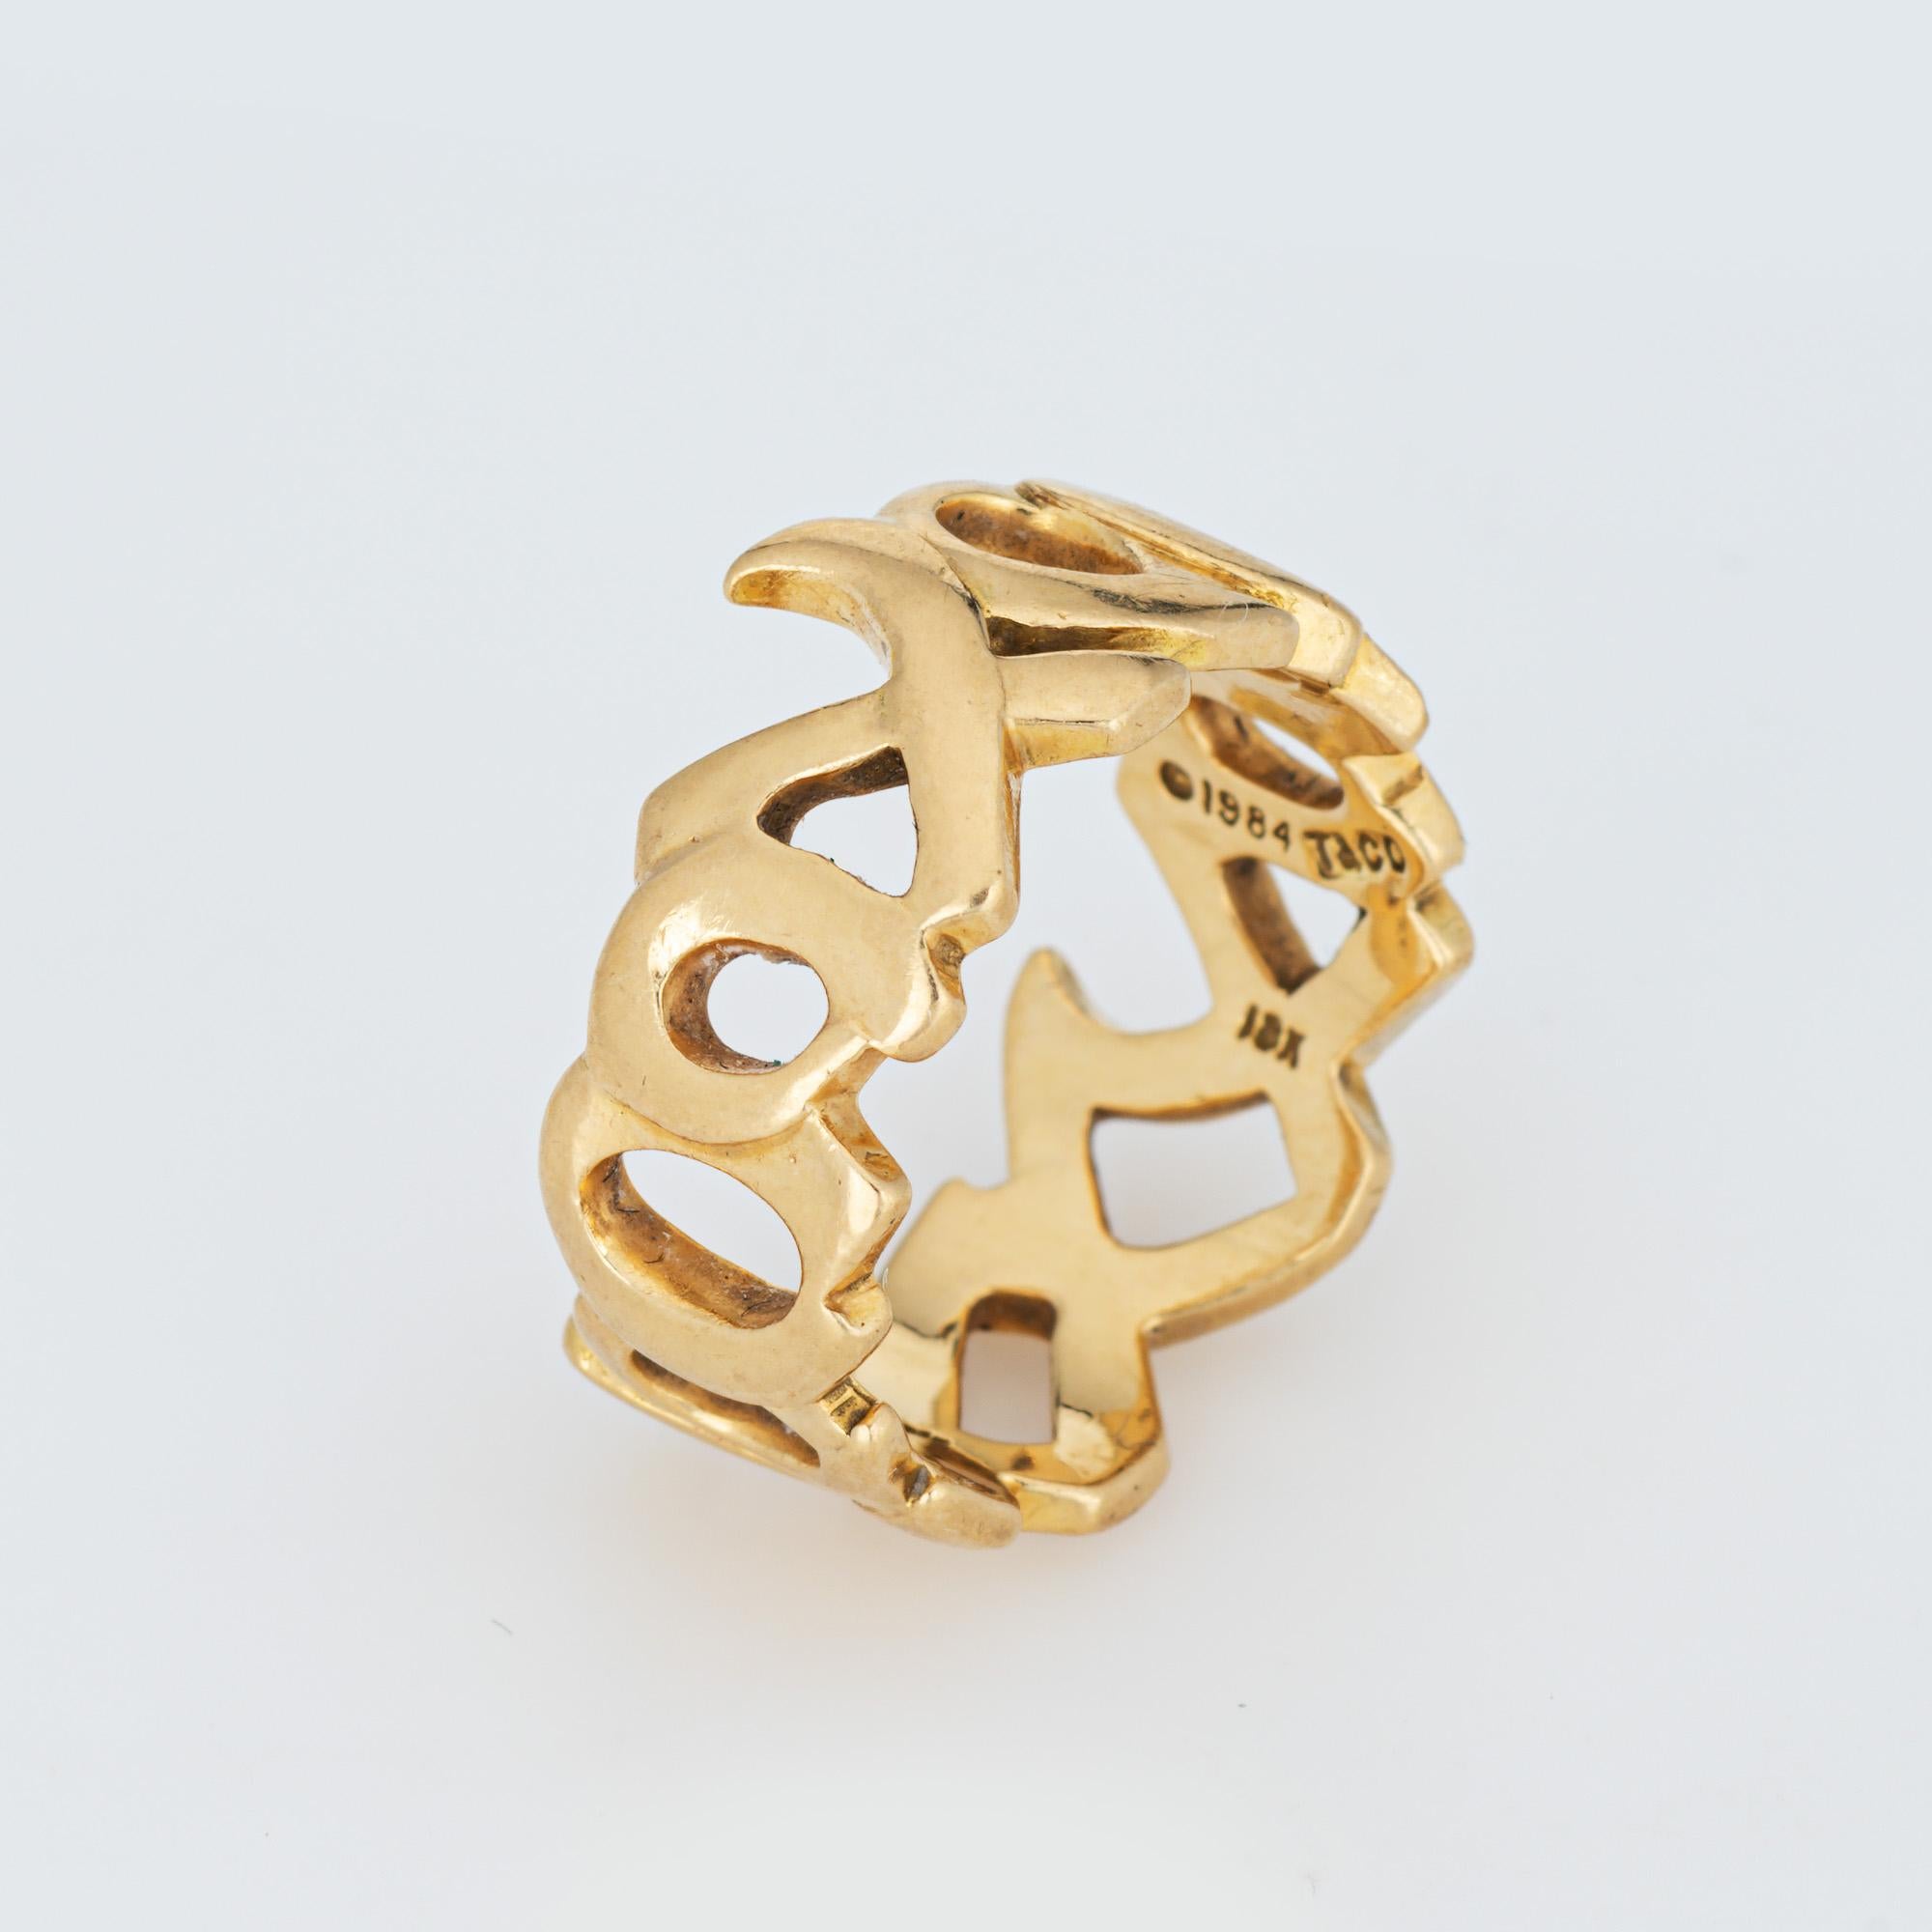 Vintage Tiffany & Co 'XO' ring designed by Paloma Picasso, crafted in 18 karat yellow gold (circa 1984).  

The 'XO' love and kisses pattern is a great 80s era design by Paloma Picasso. The band has a flat design and high polished finished,